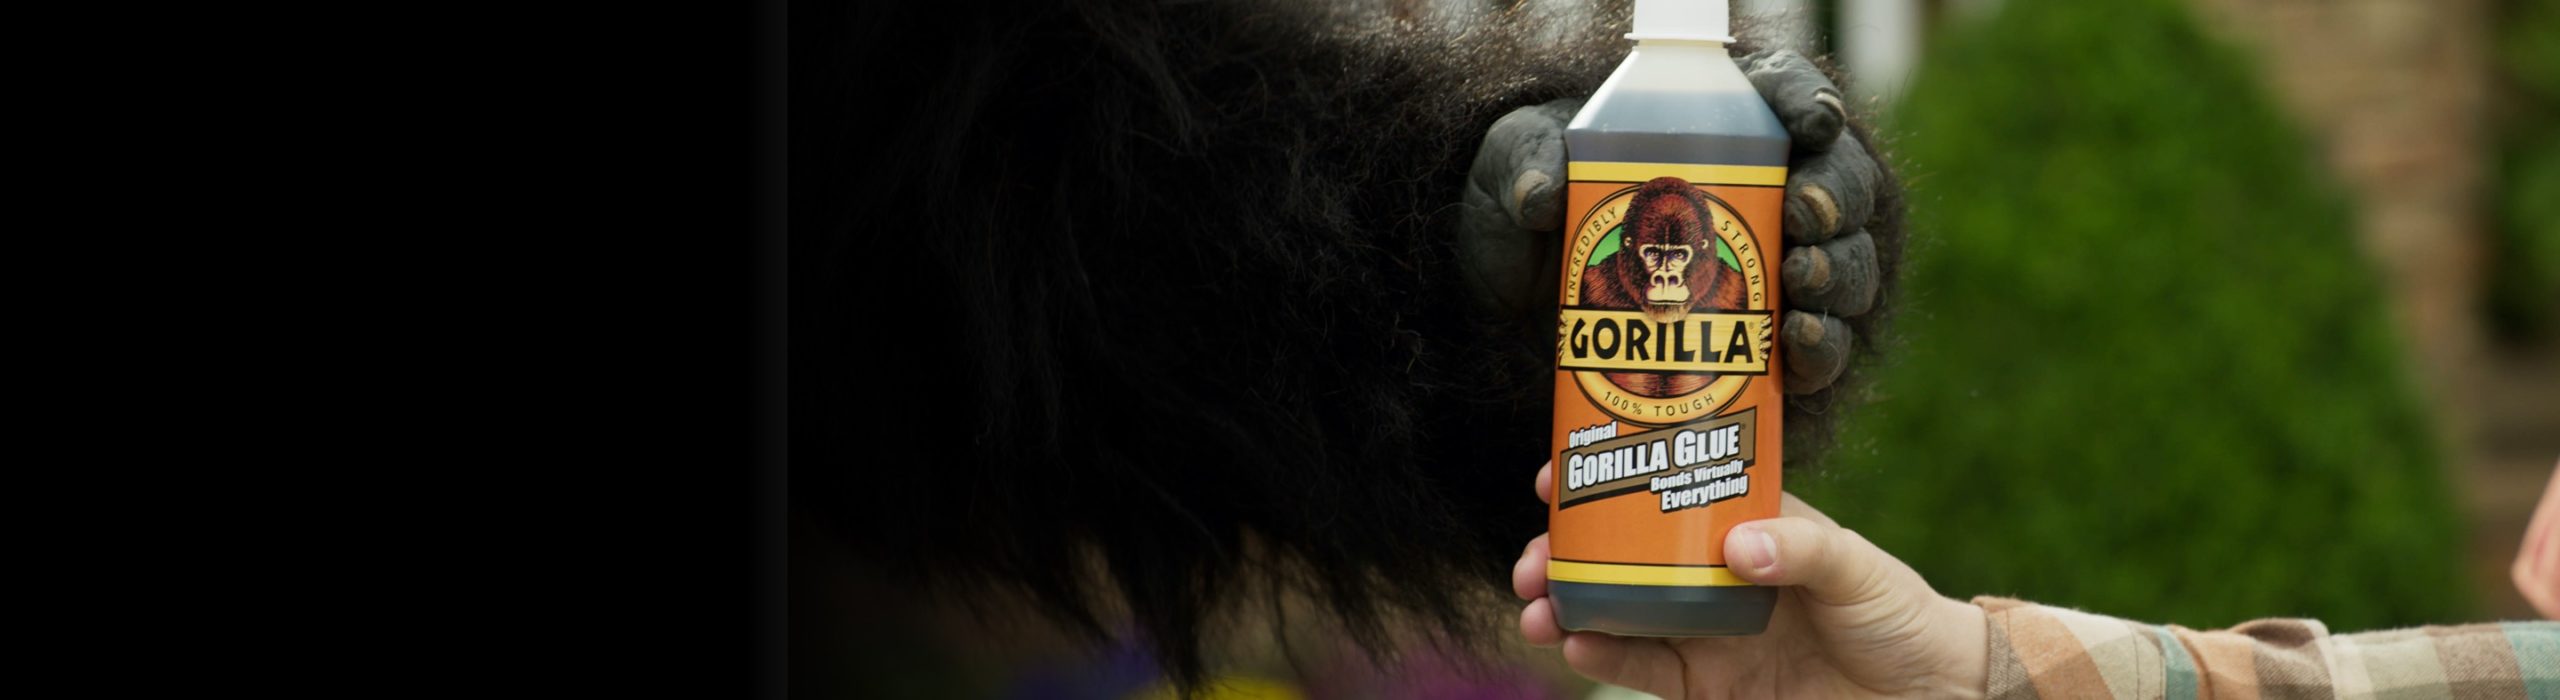 Gorilla Glue bottle being held by by a human hand and gorilla hand